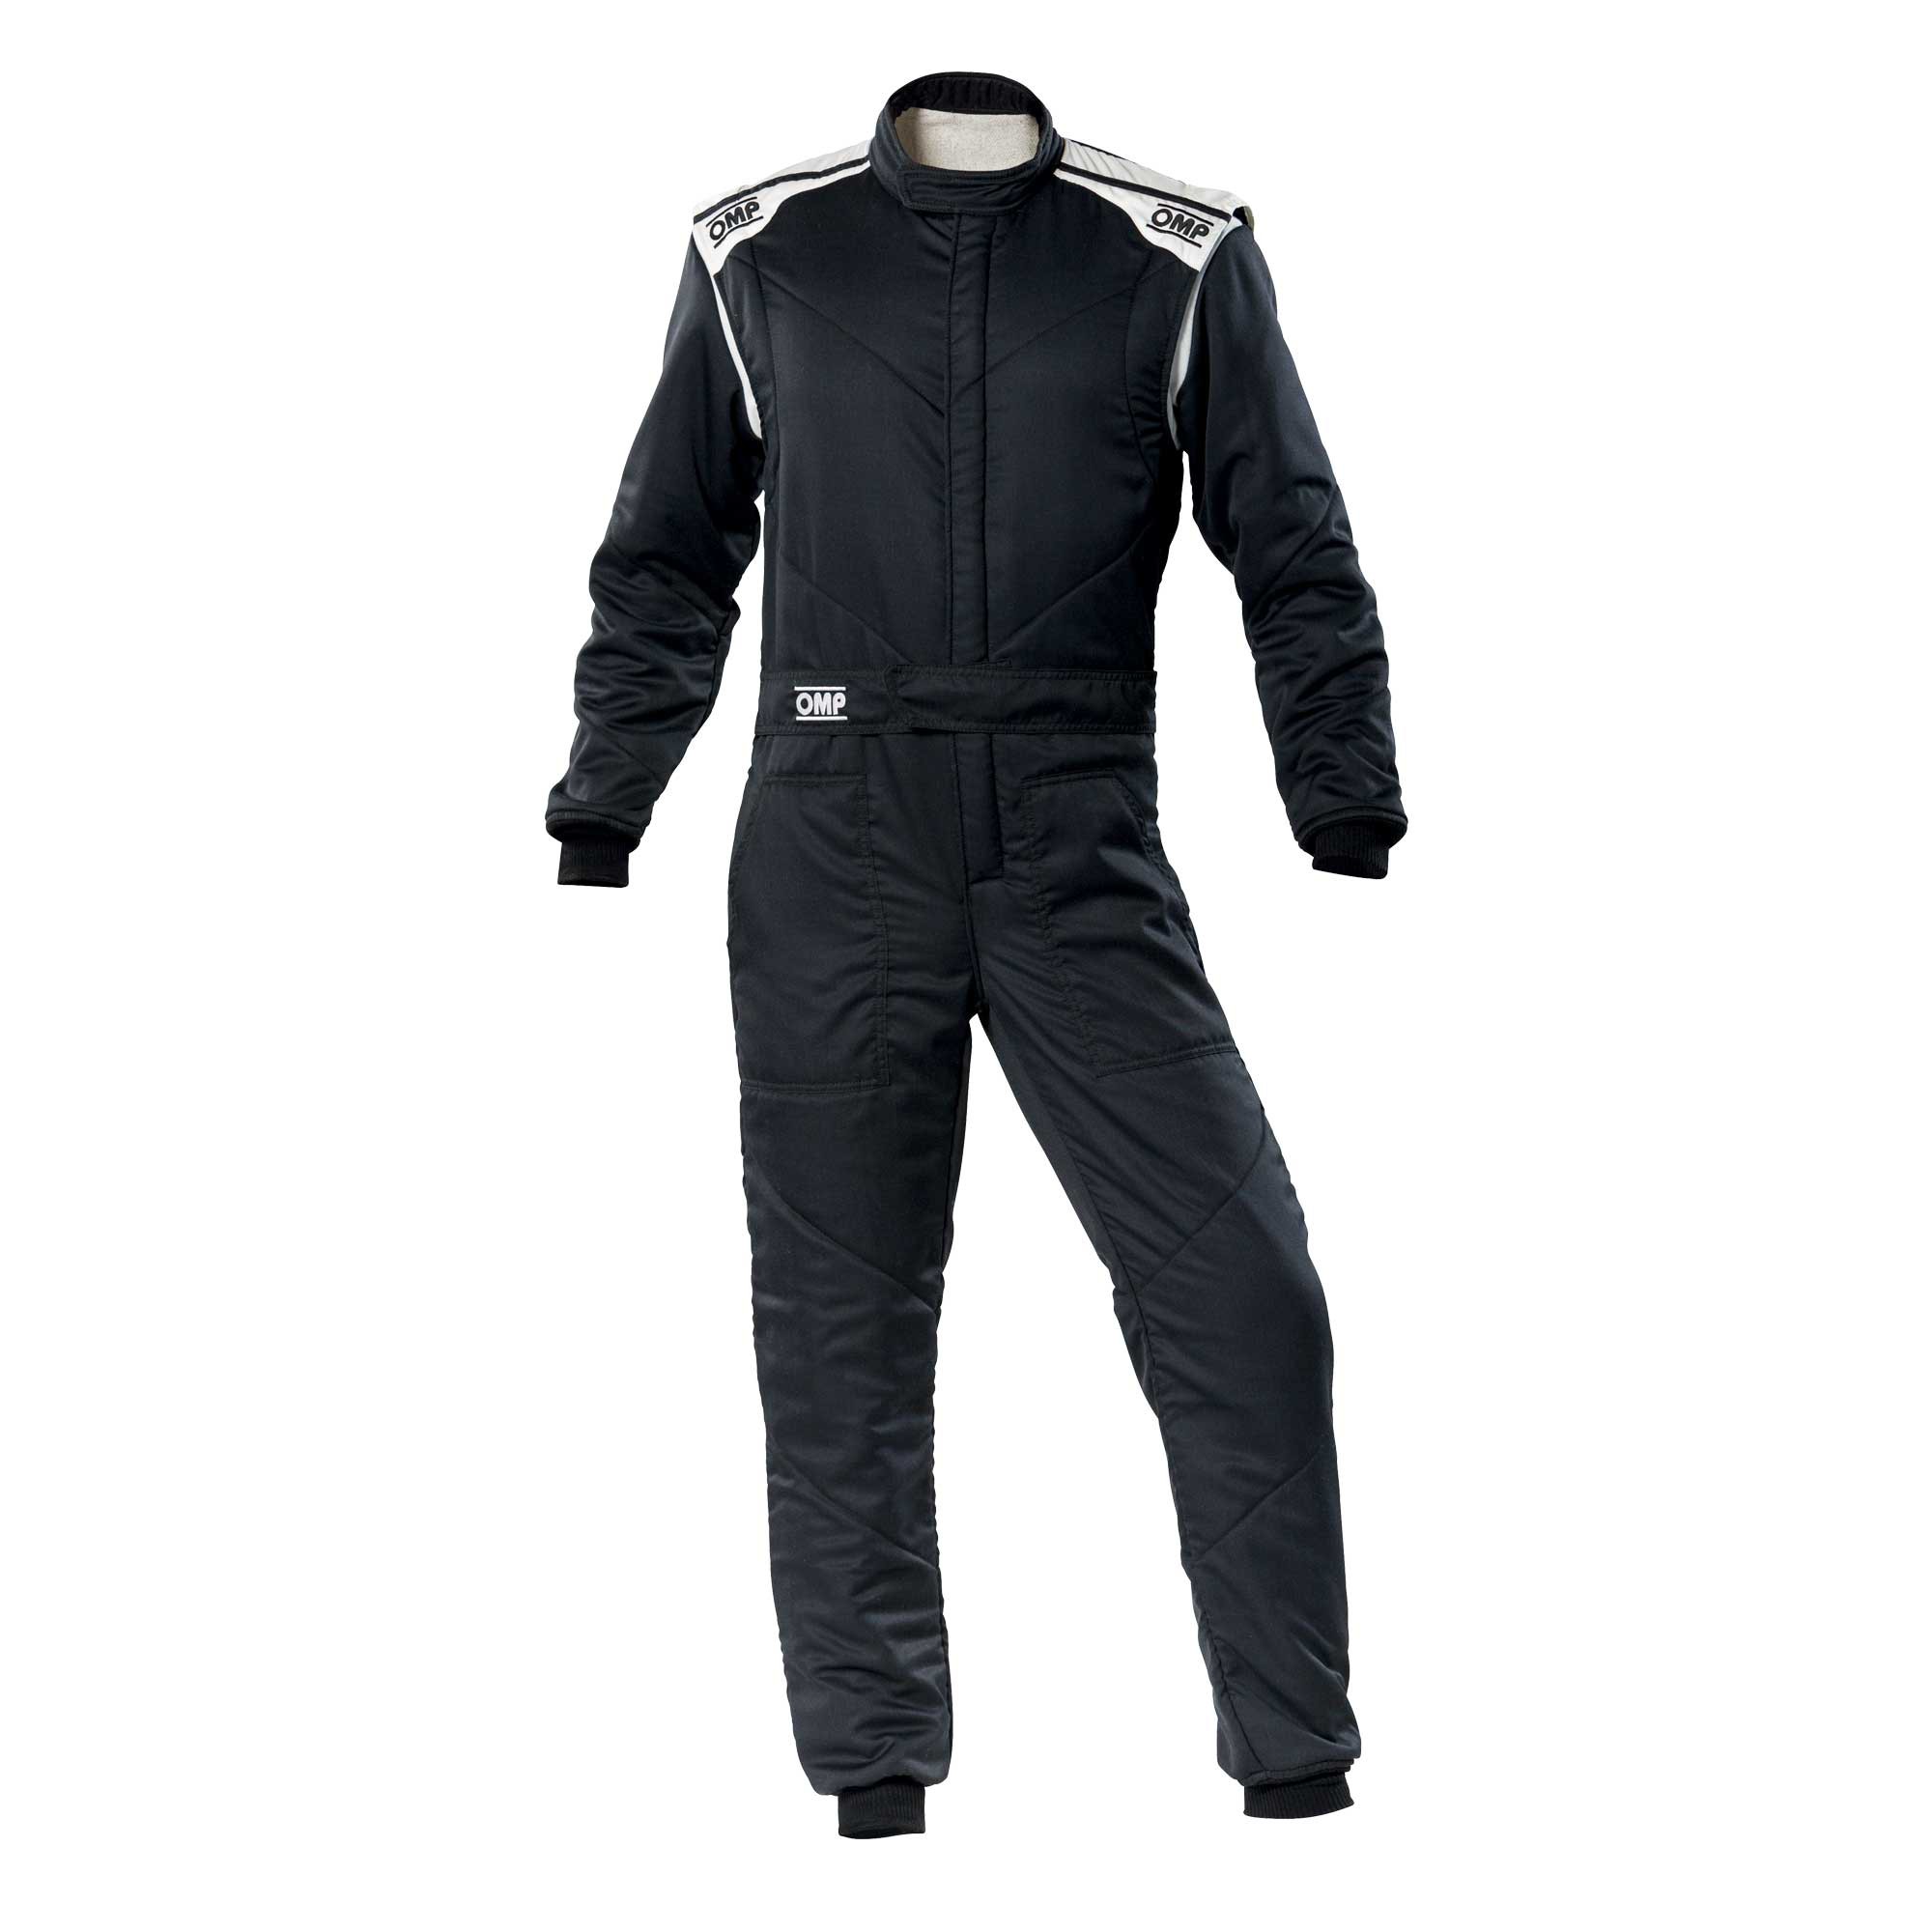 FIRST-S OVERALL BLACK SIZE 44 FIA 8856-2018